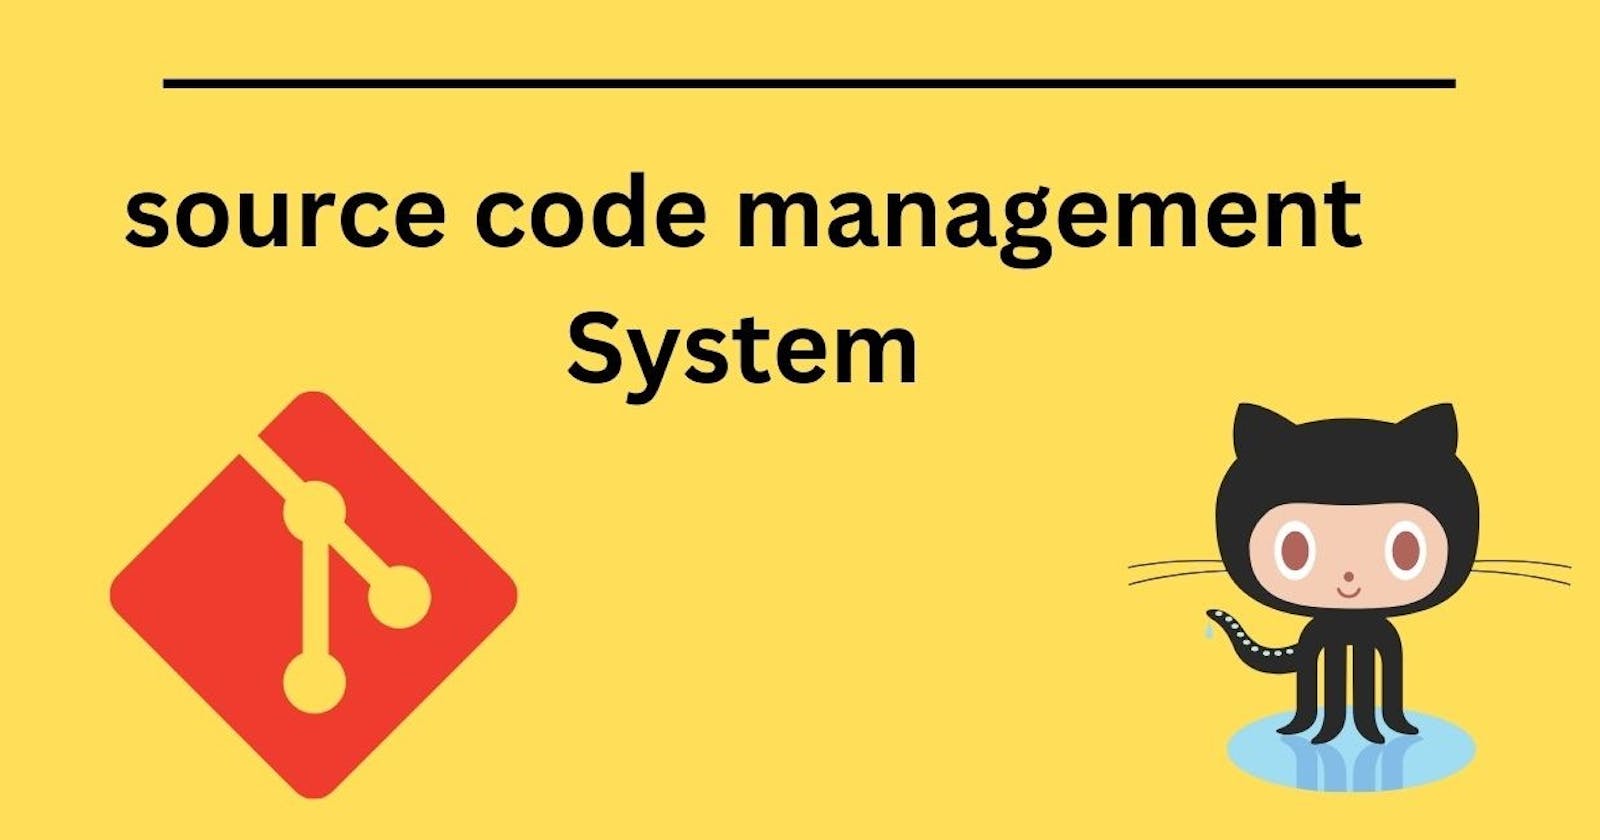 The Source code management System